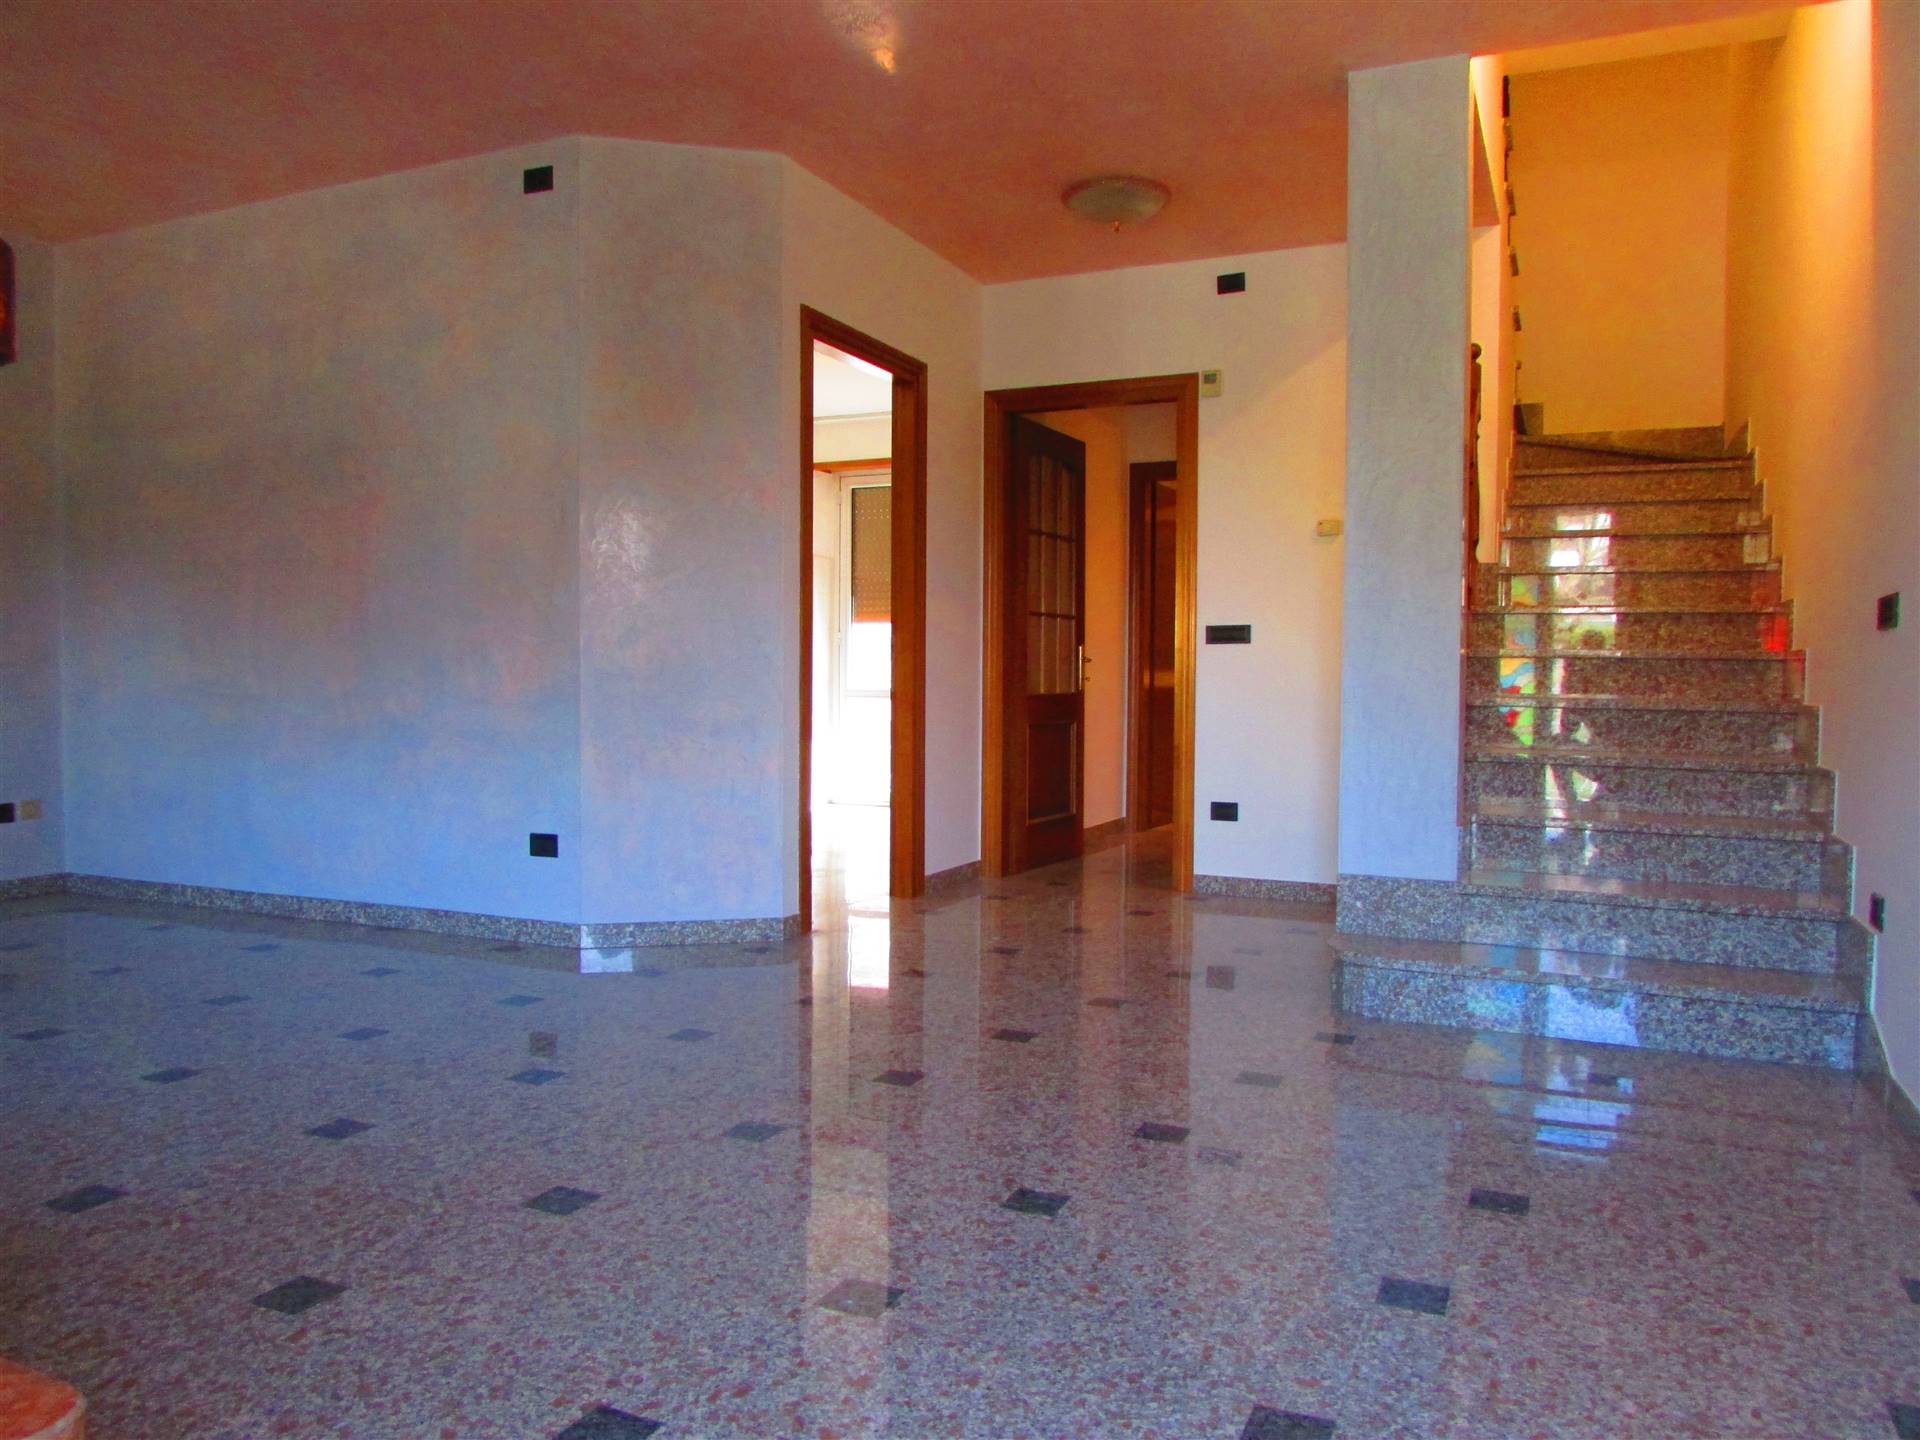 ALBAREDO D'ADIGE, Terraced villa for sale of 130 Sq. mt., Excellent Condition, Heating Individual heating system, Energetic class: D, Epi: 133,47 